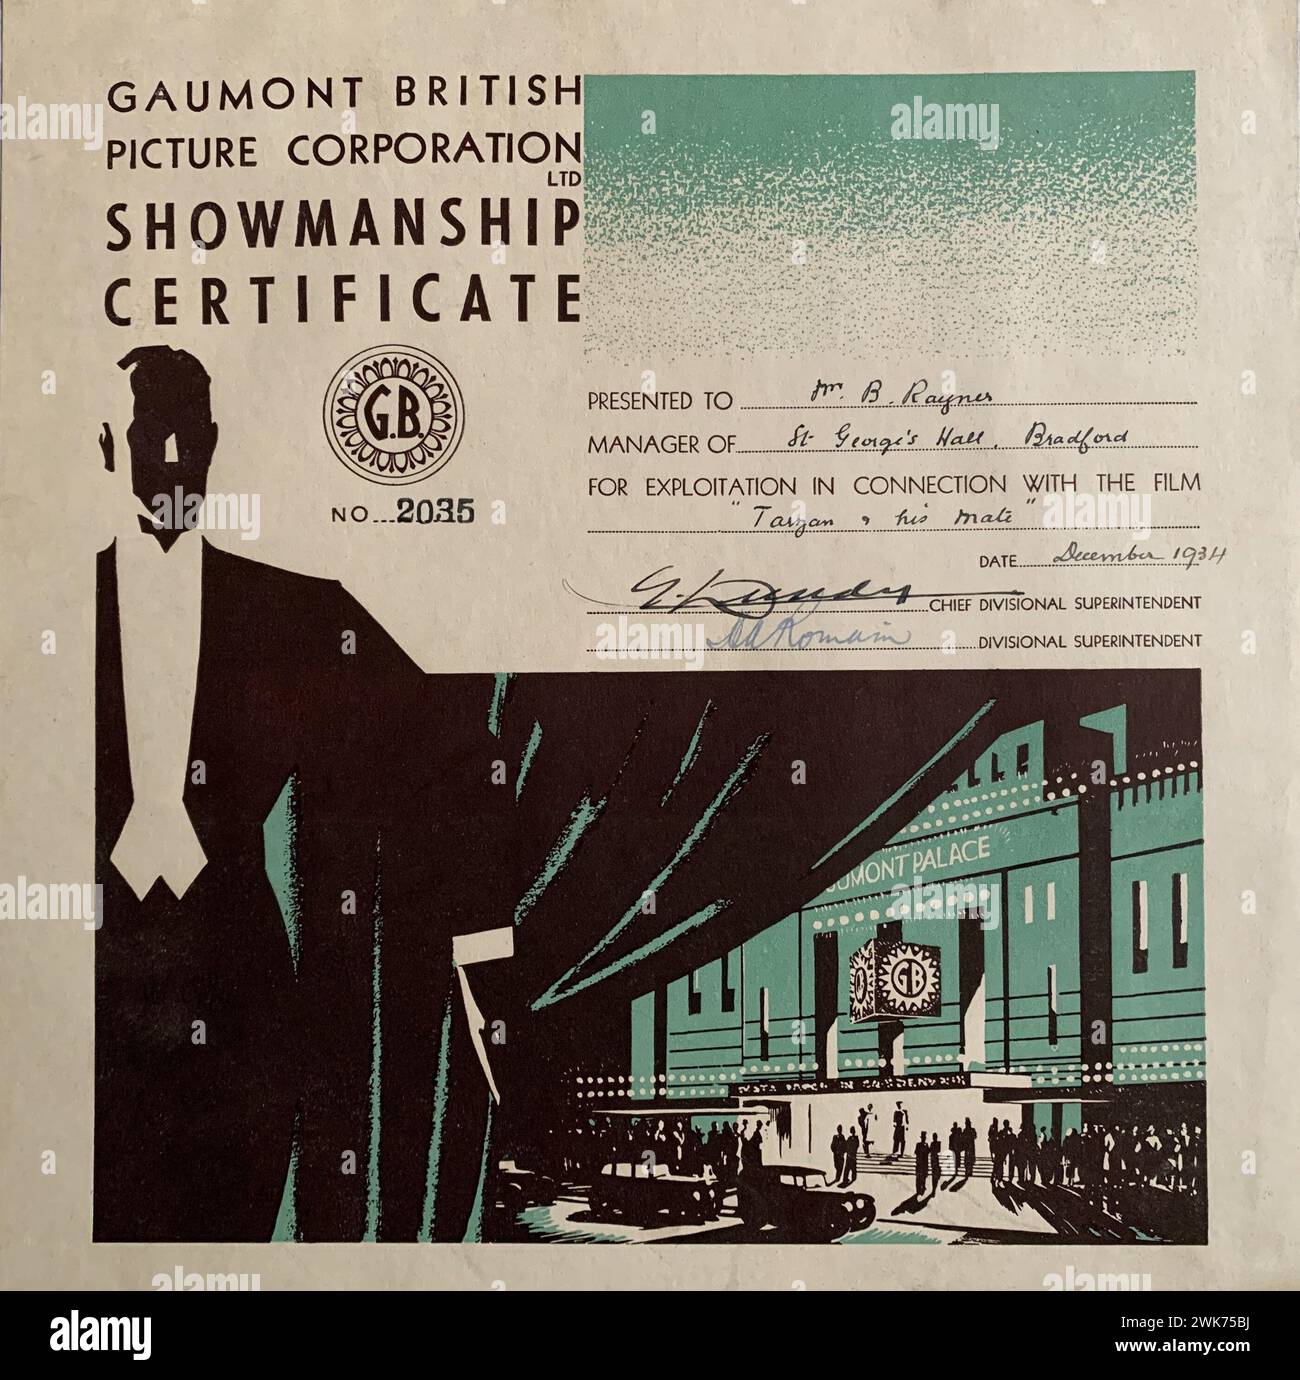 GAUMONT BRITISH PICTURE CORPORATION SHOWMANSHIP CERTIFICATE presented in December 1934 to Mr. B. Raynes Manager of St. George's Hall, Bradford for Exploitation in connection with the film TARZAN AND HIS MATE 1934 with Johnny Weissmuller and Maureen O'Sullivan Stock Photo